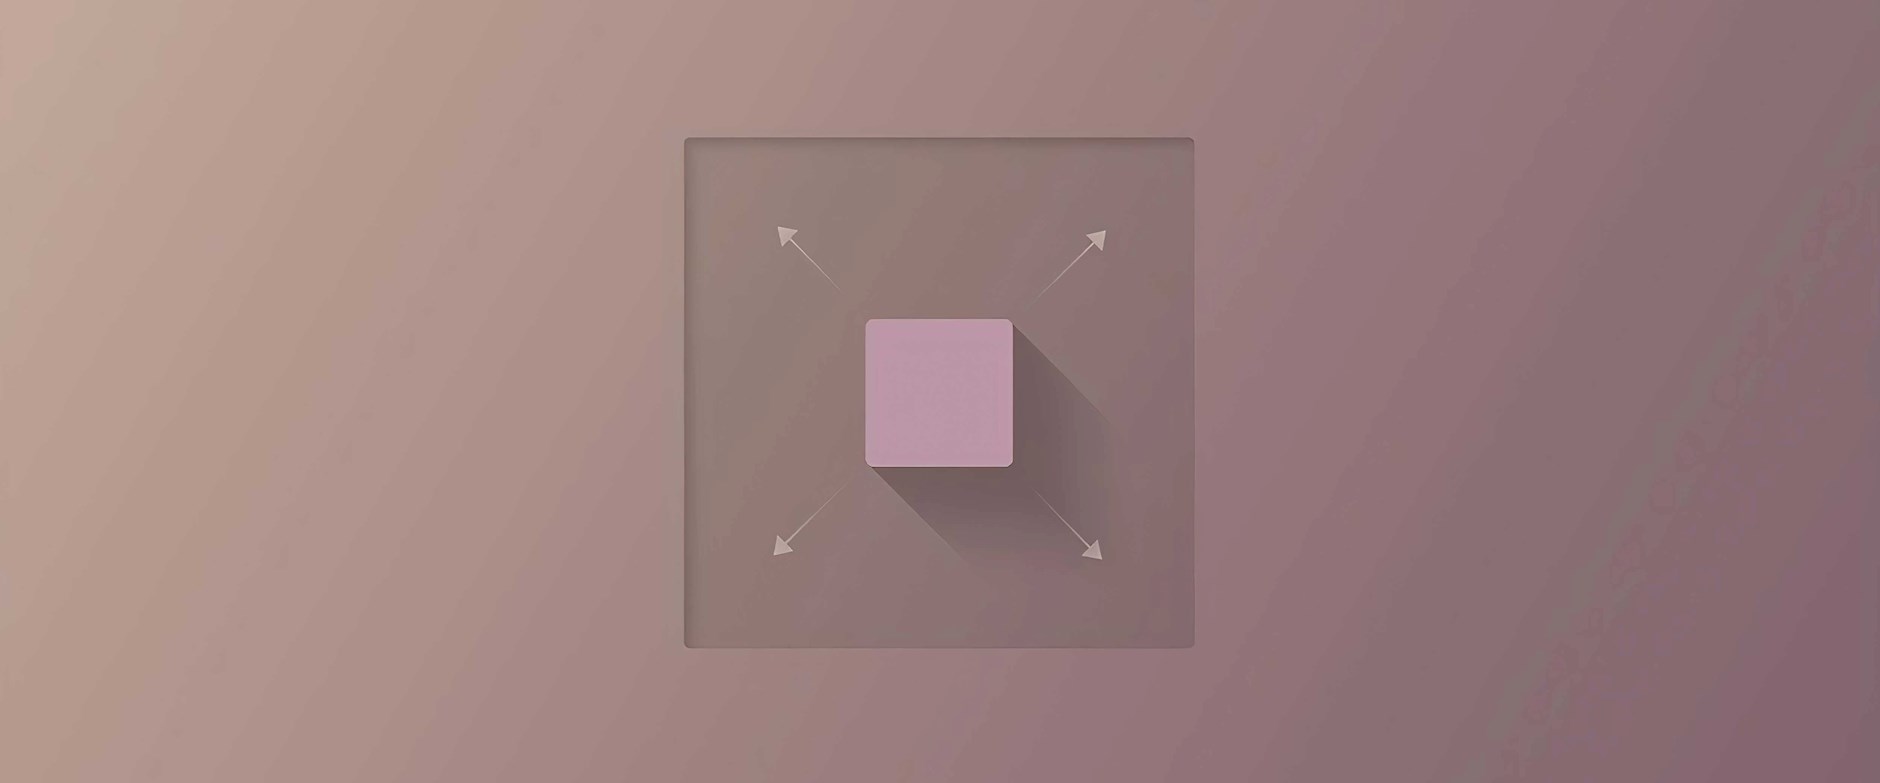 Square with extending lines from the corners